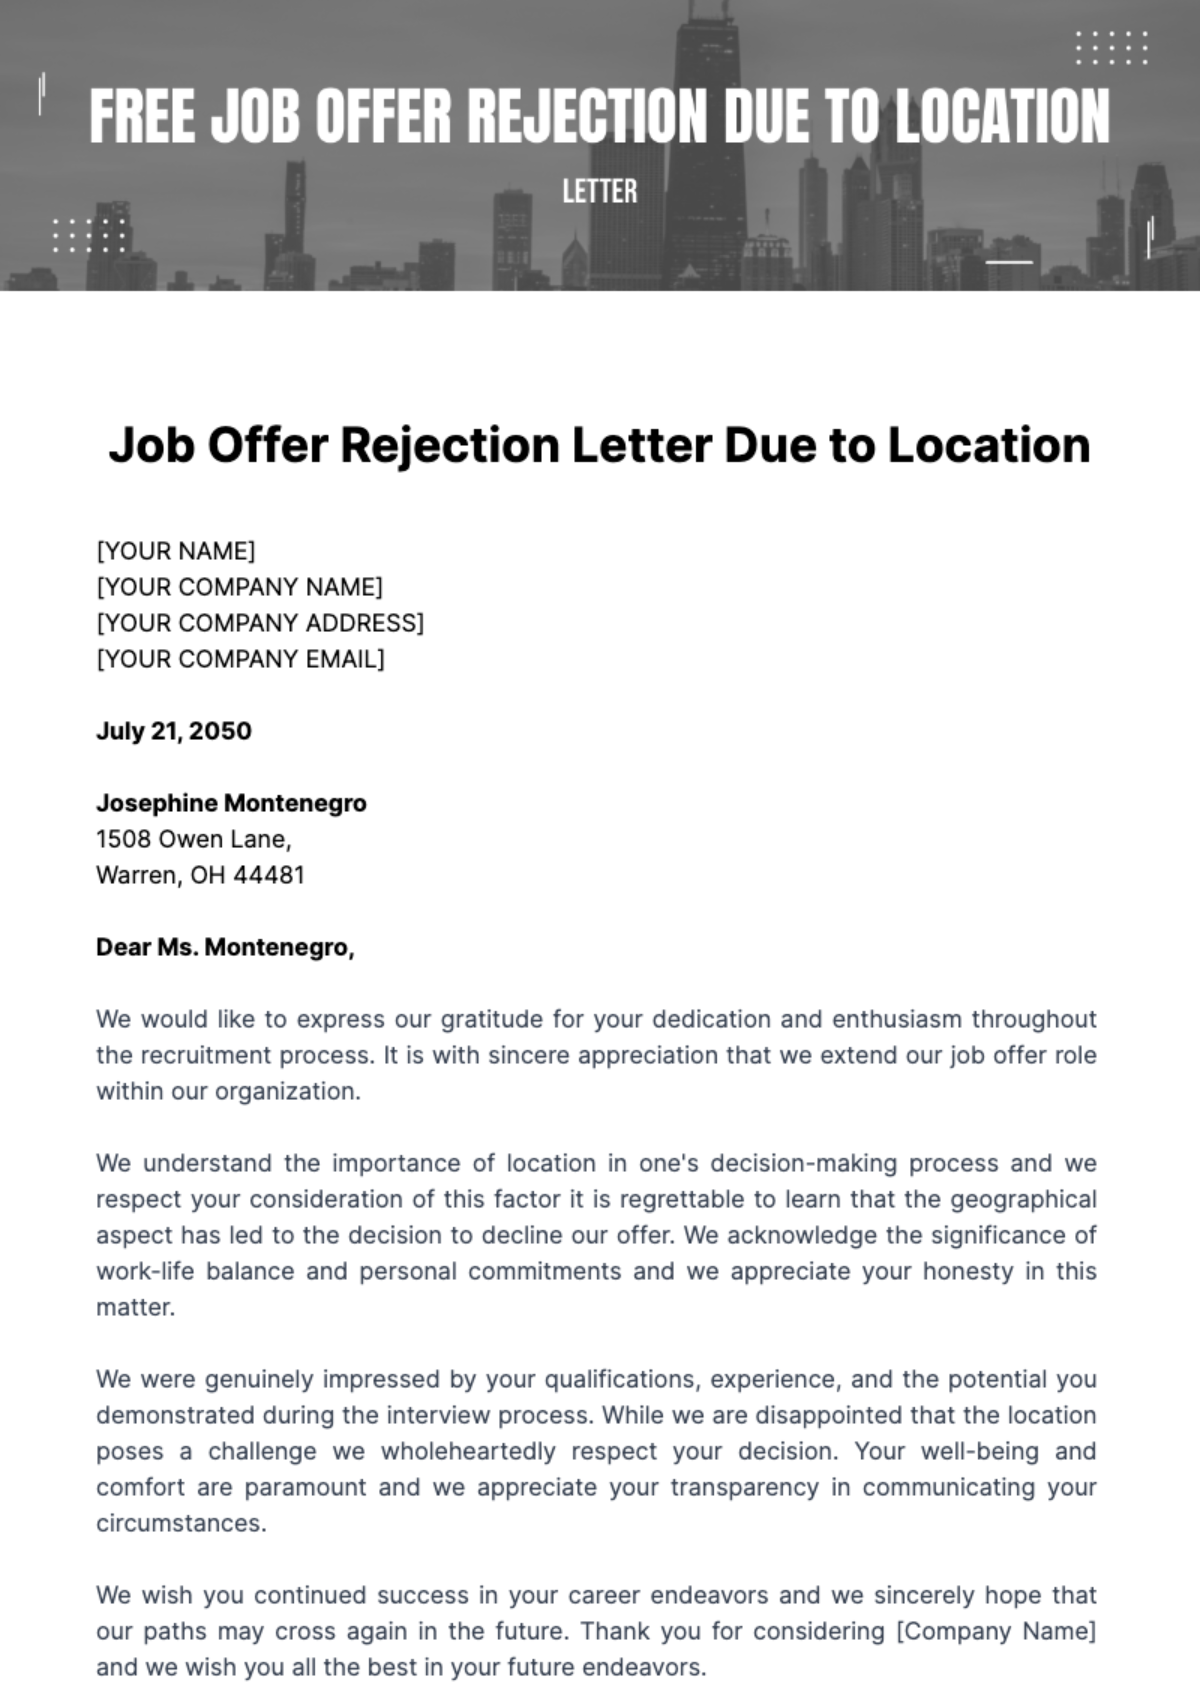 Free Job Offer Rejection Letter Due to Location Template